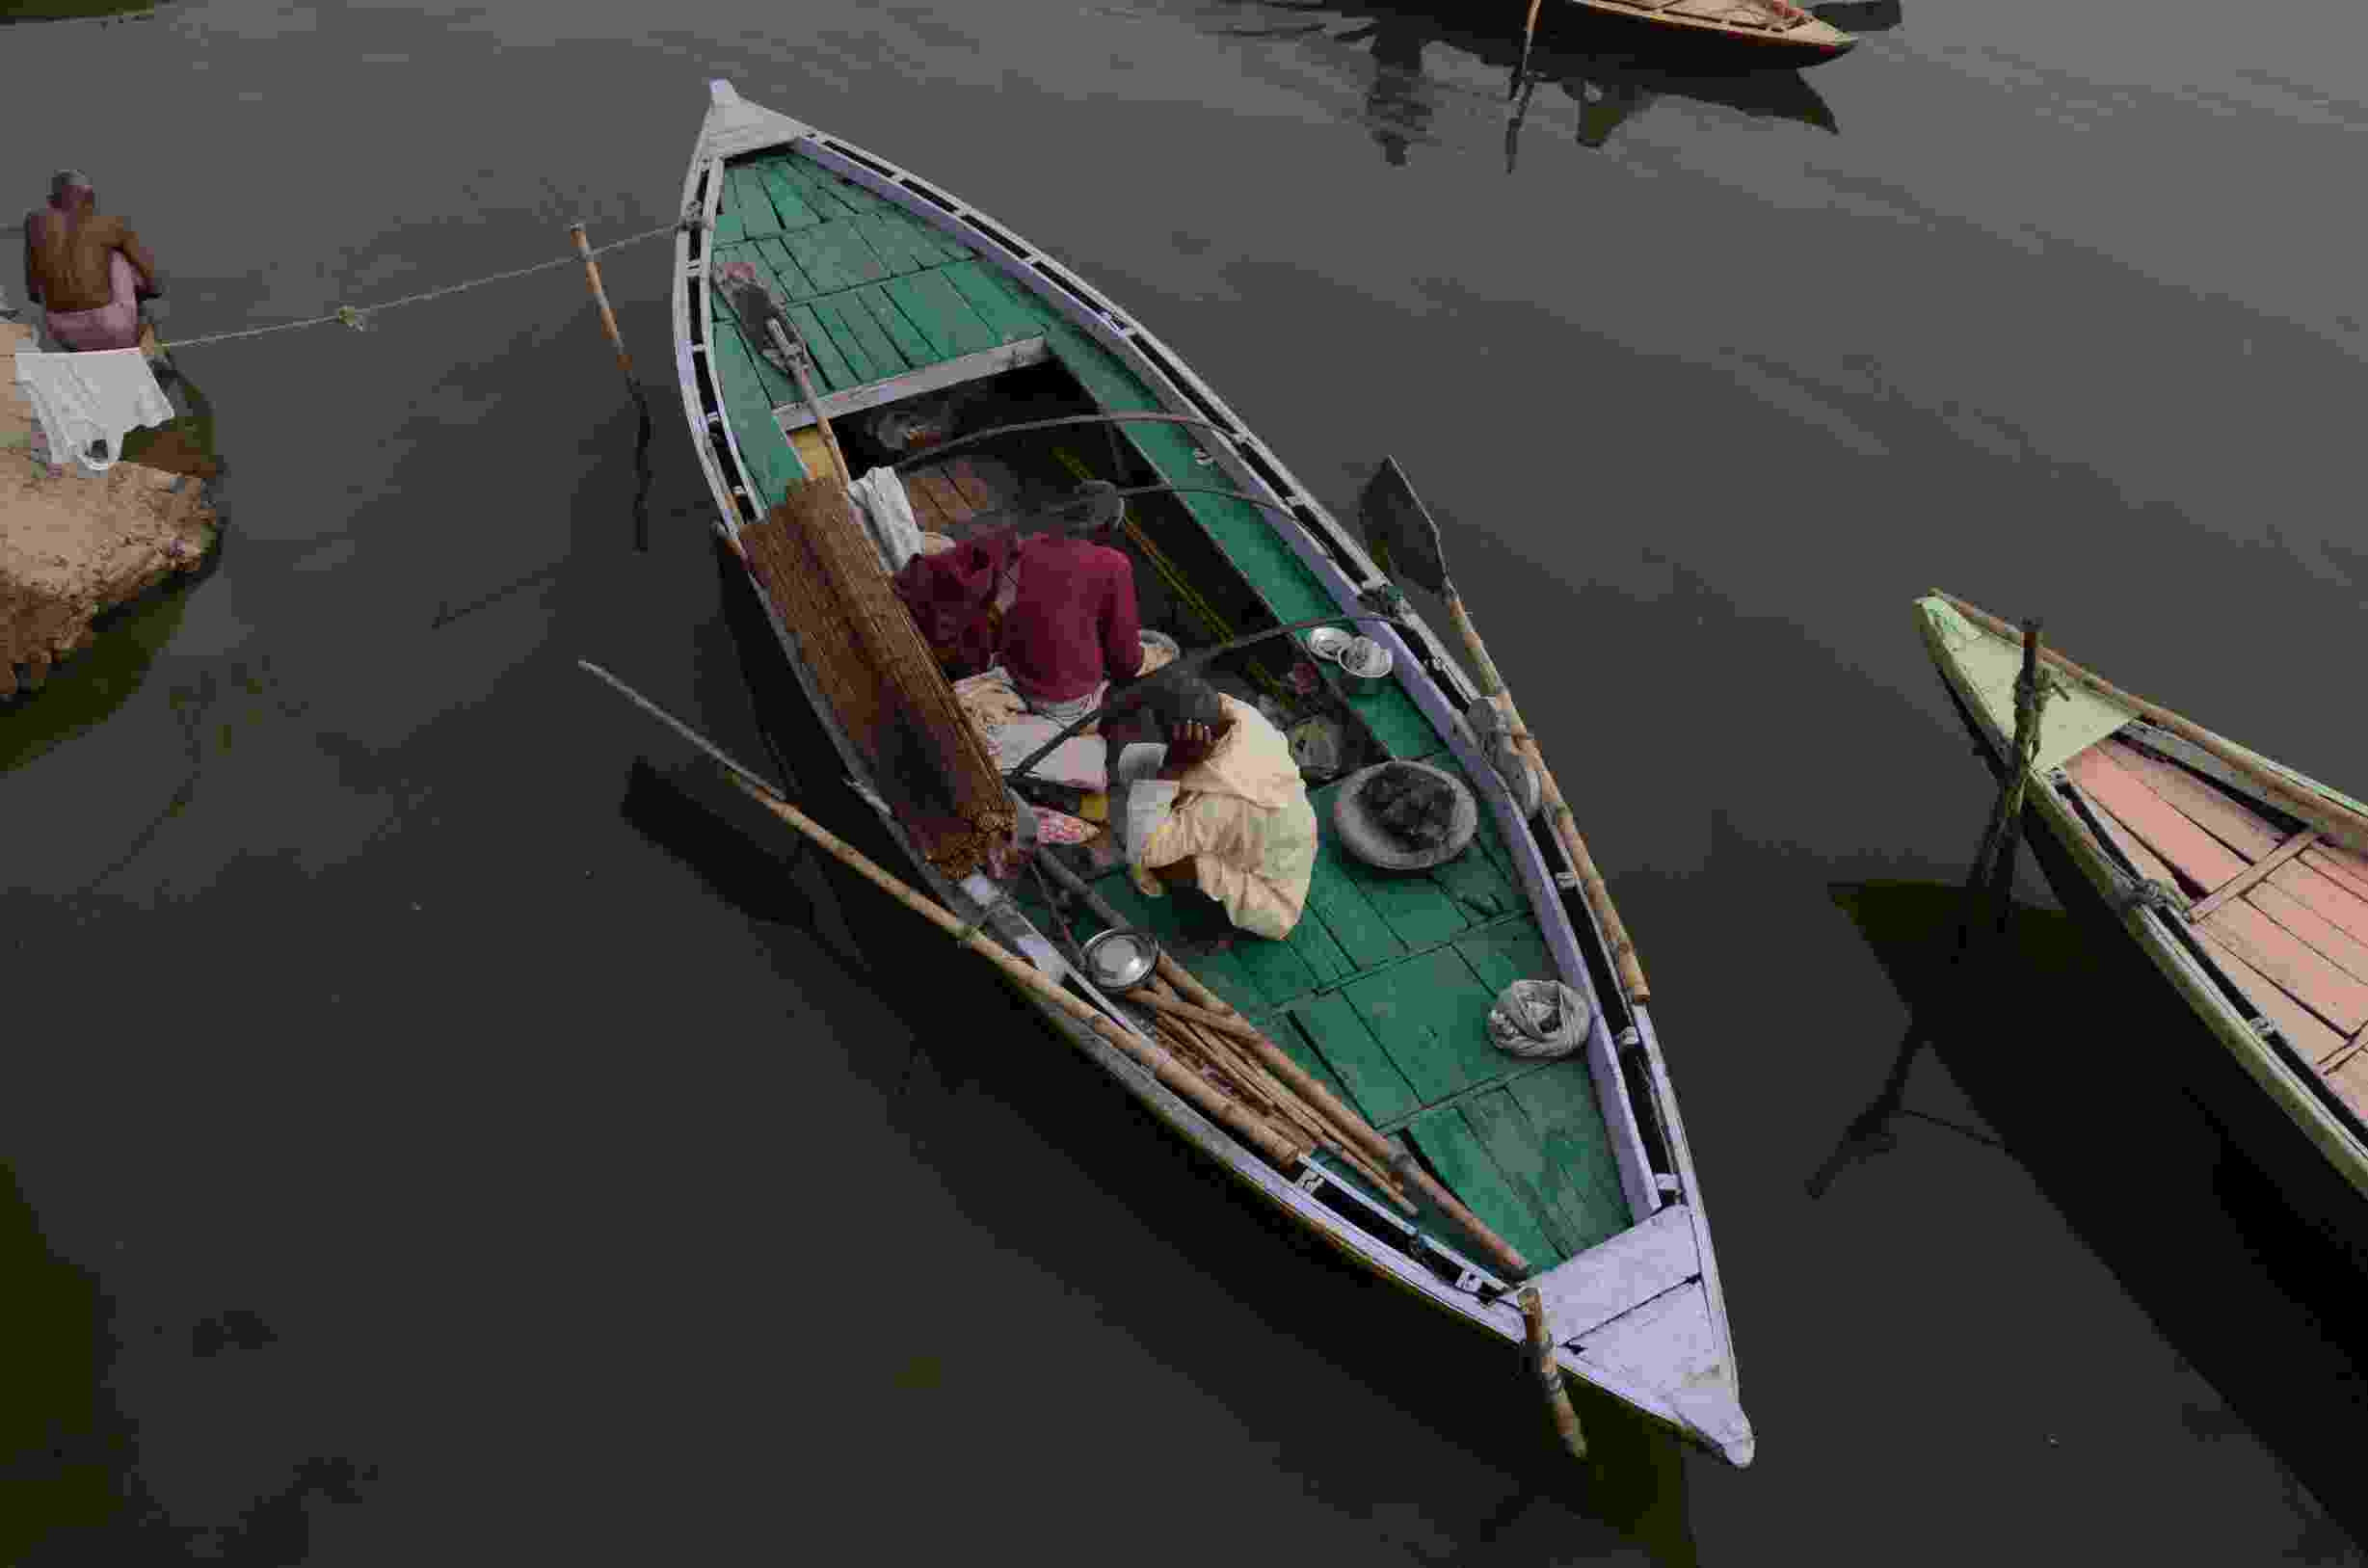 Two local boatmen in their green rowing boat on the River Ganges, Varanasi, India